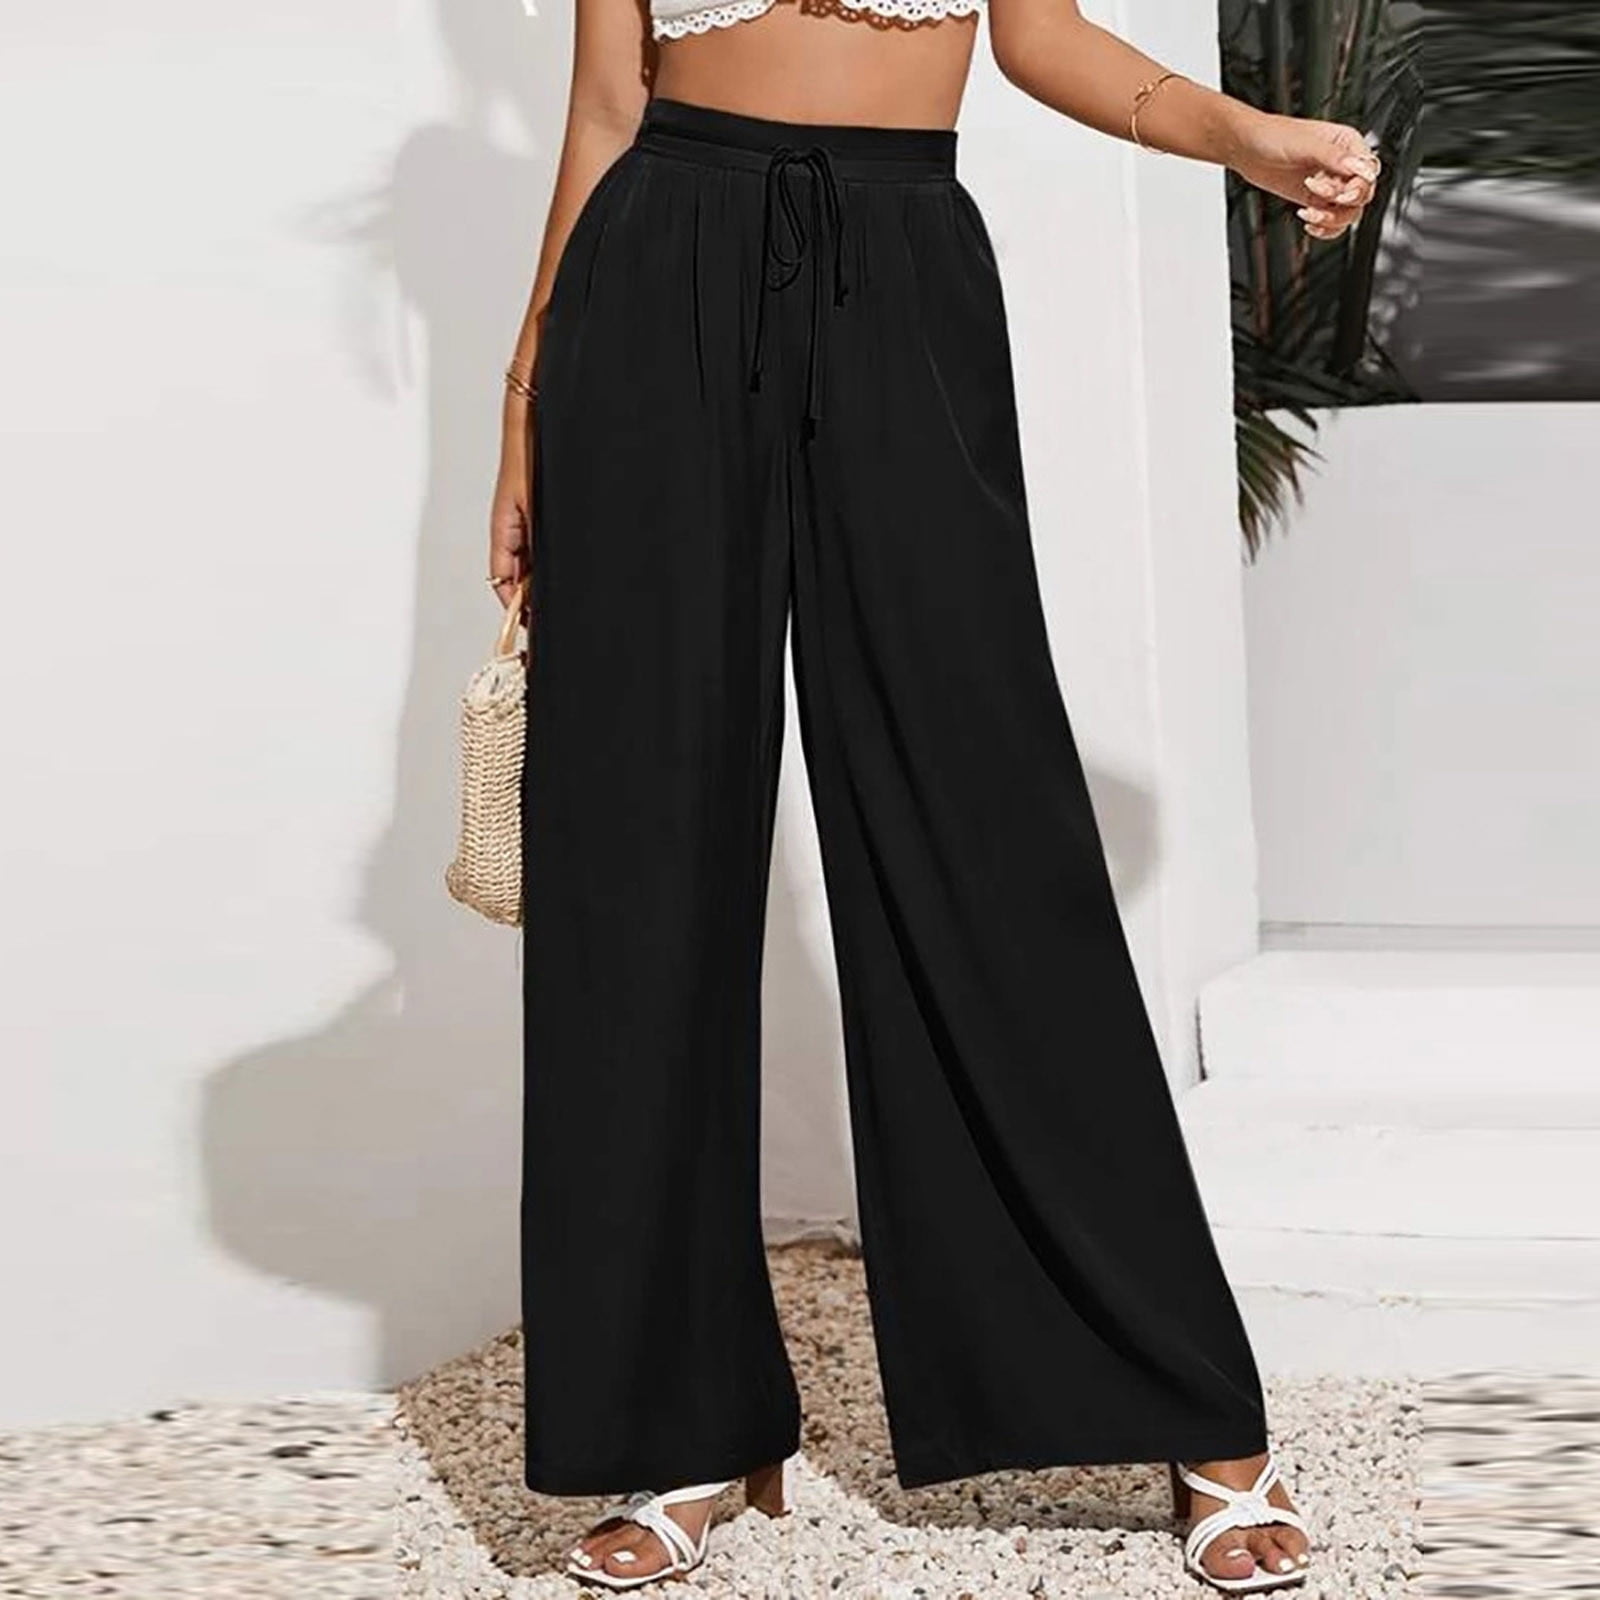  SDJMa My Orders Wide Leg Pants for Women Casual